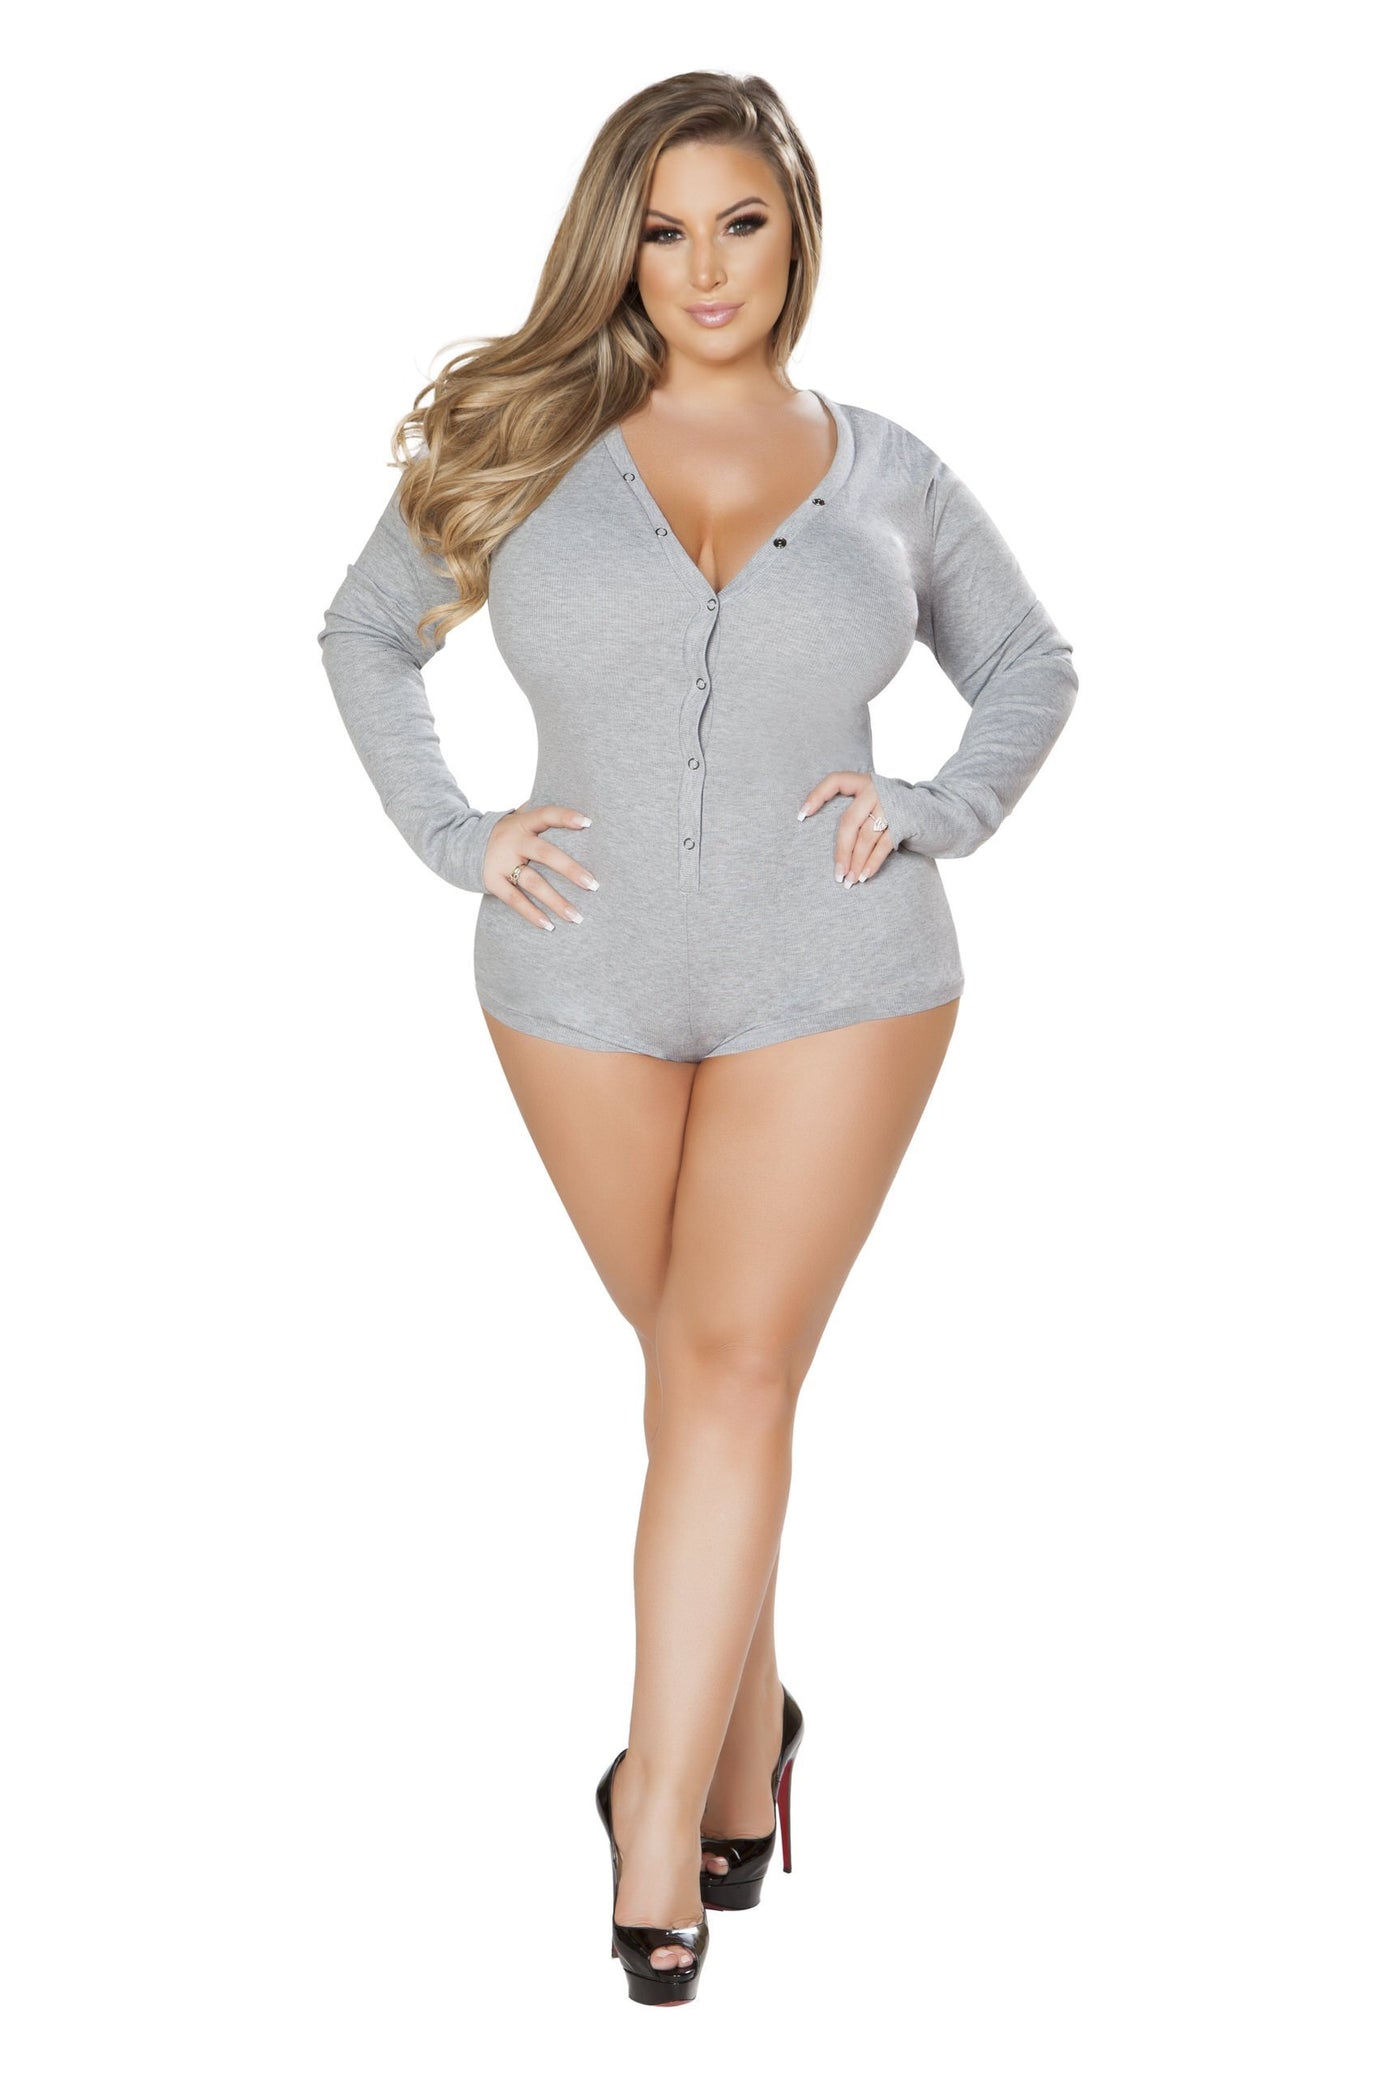 Buy Cozy and Comfy Sweater Pajama Romper from RomaRetailShop for 23.99 with Same Day Shipping Designed by Roma Costume LI211-Grey-XL/XXL